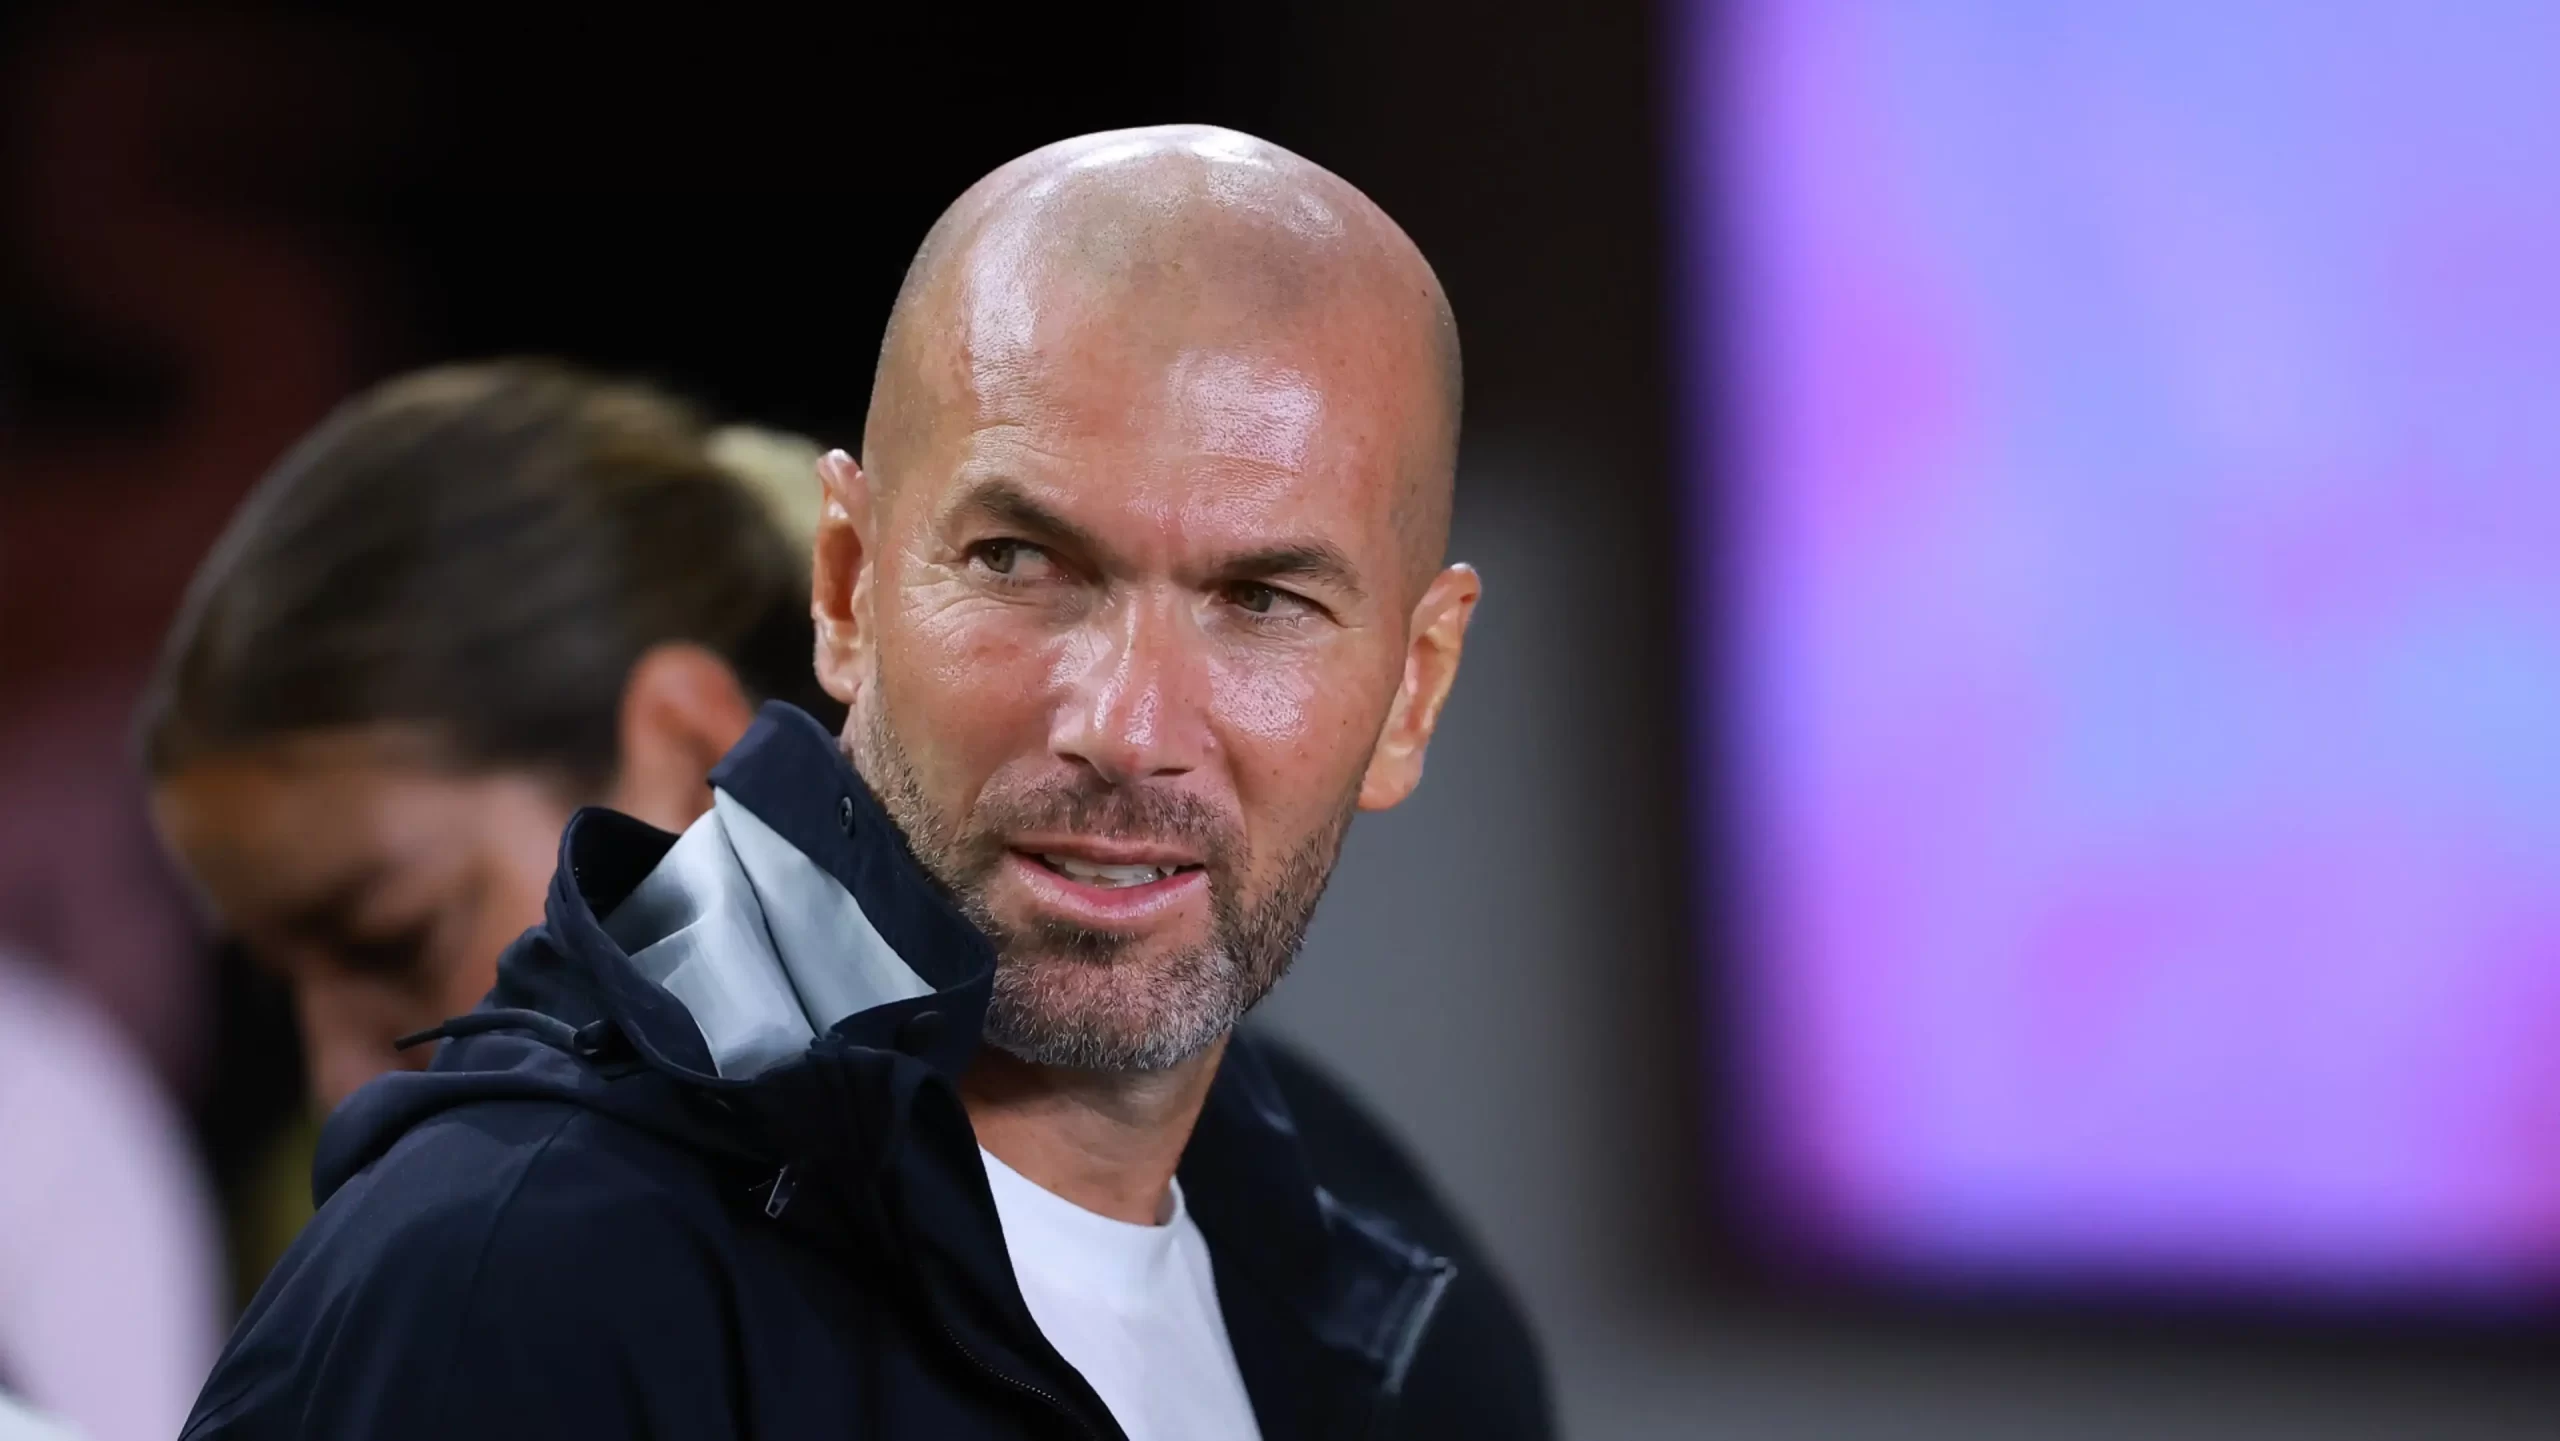 "I see Zidane going to Manchester United" -- Baptista